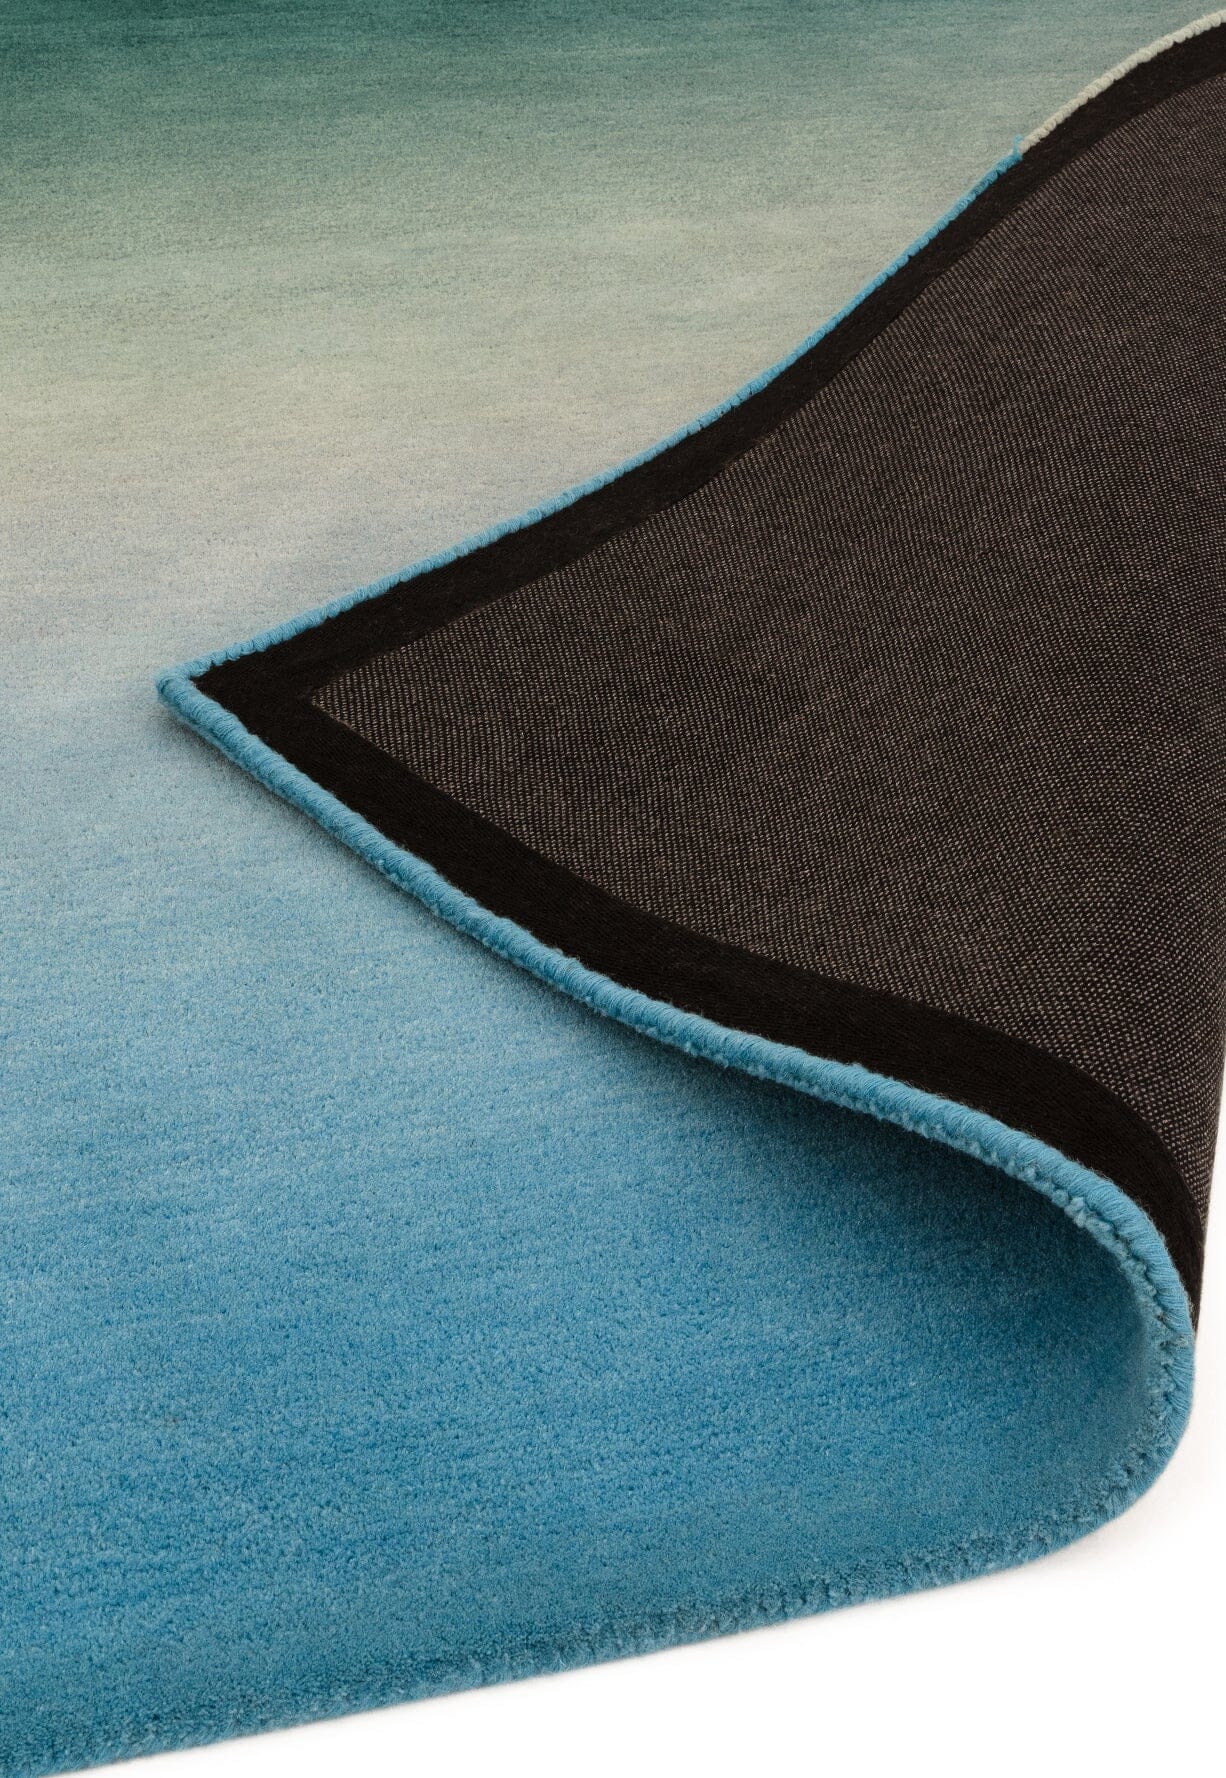  Asiatic Carpets-Asiatic Carpets Ombre Hand Tufted Runner Blue - 70 x 240cm-Blue 837 